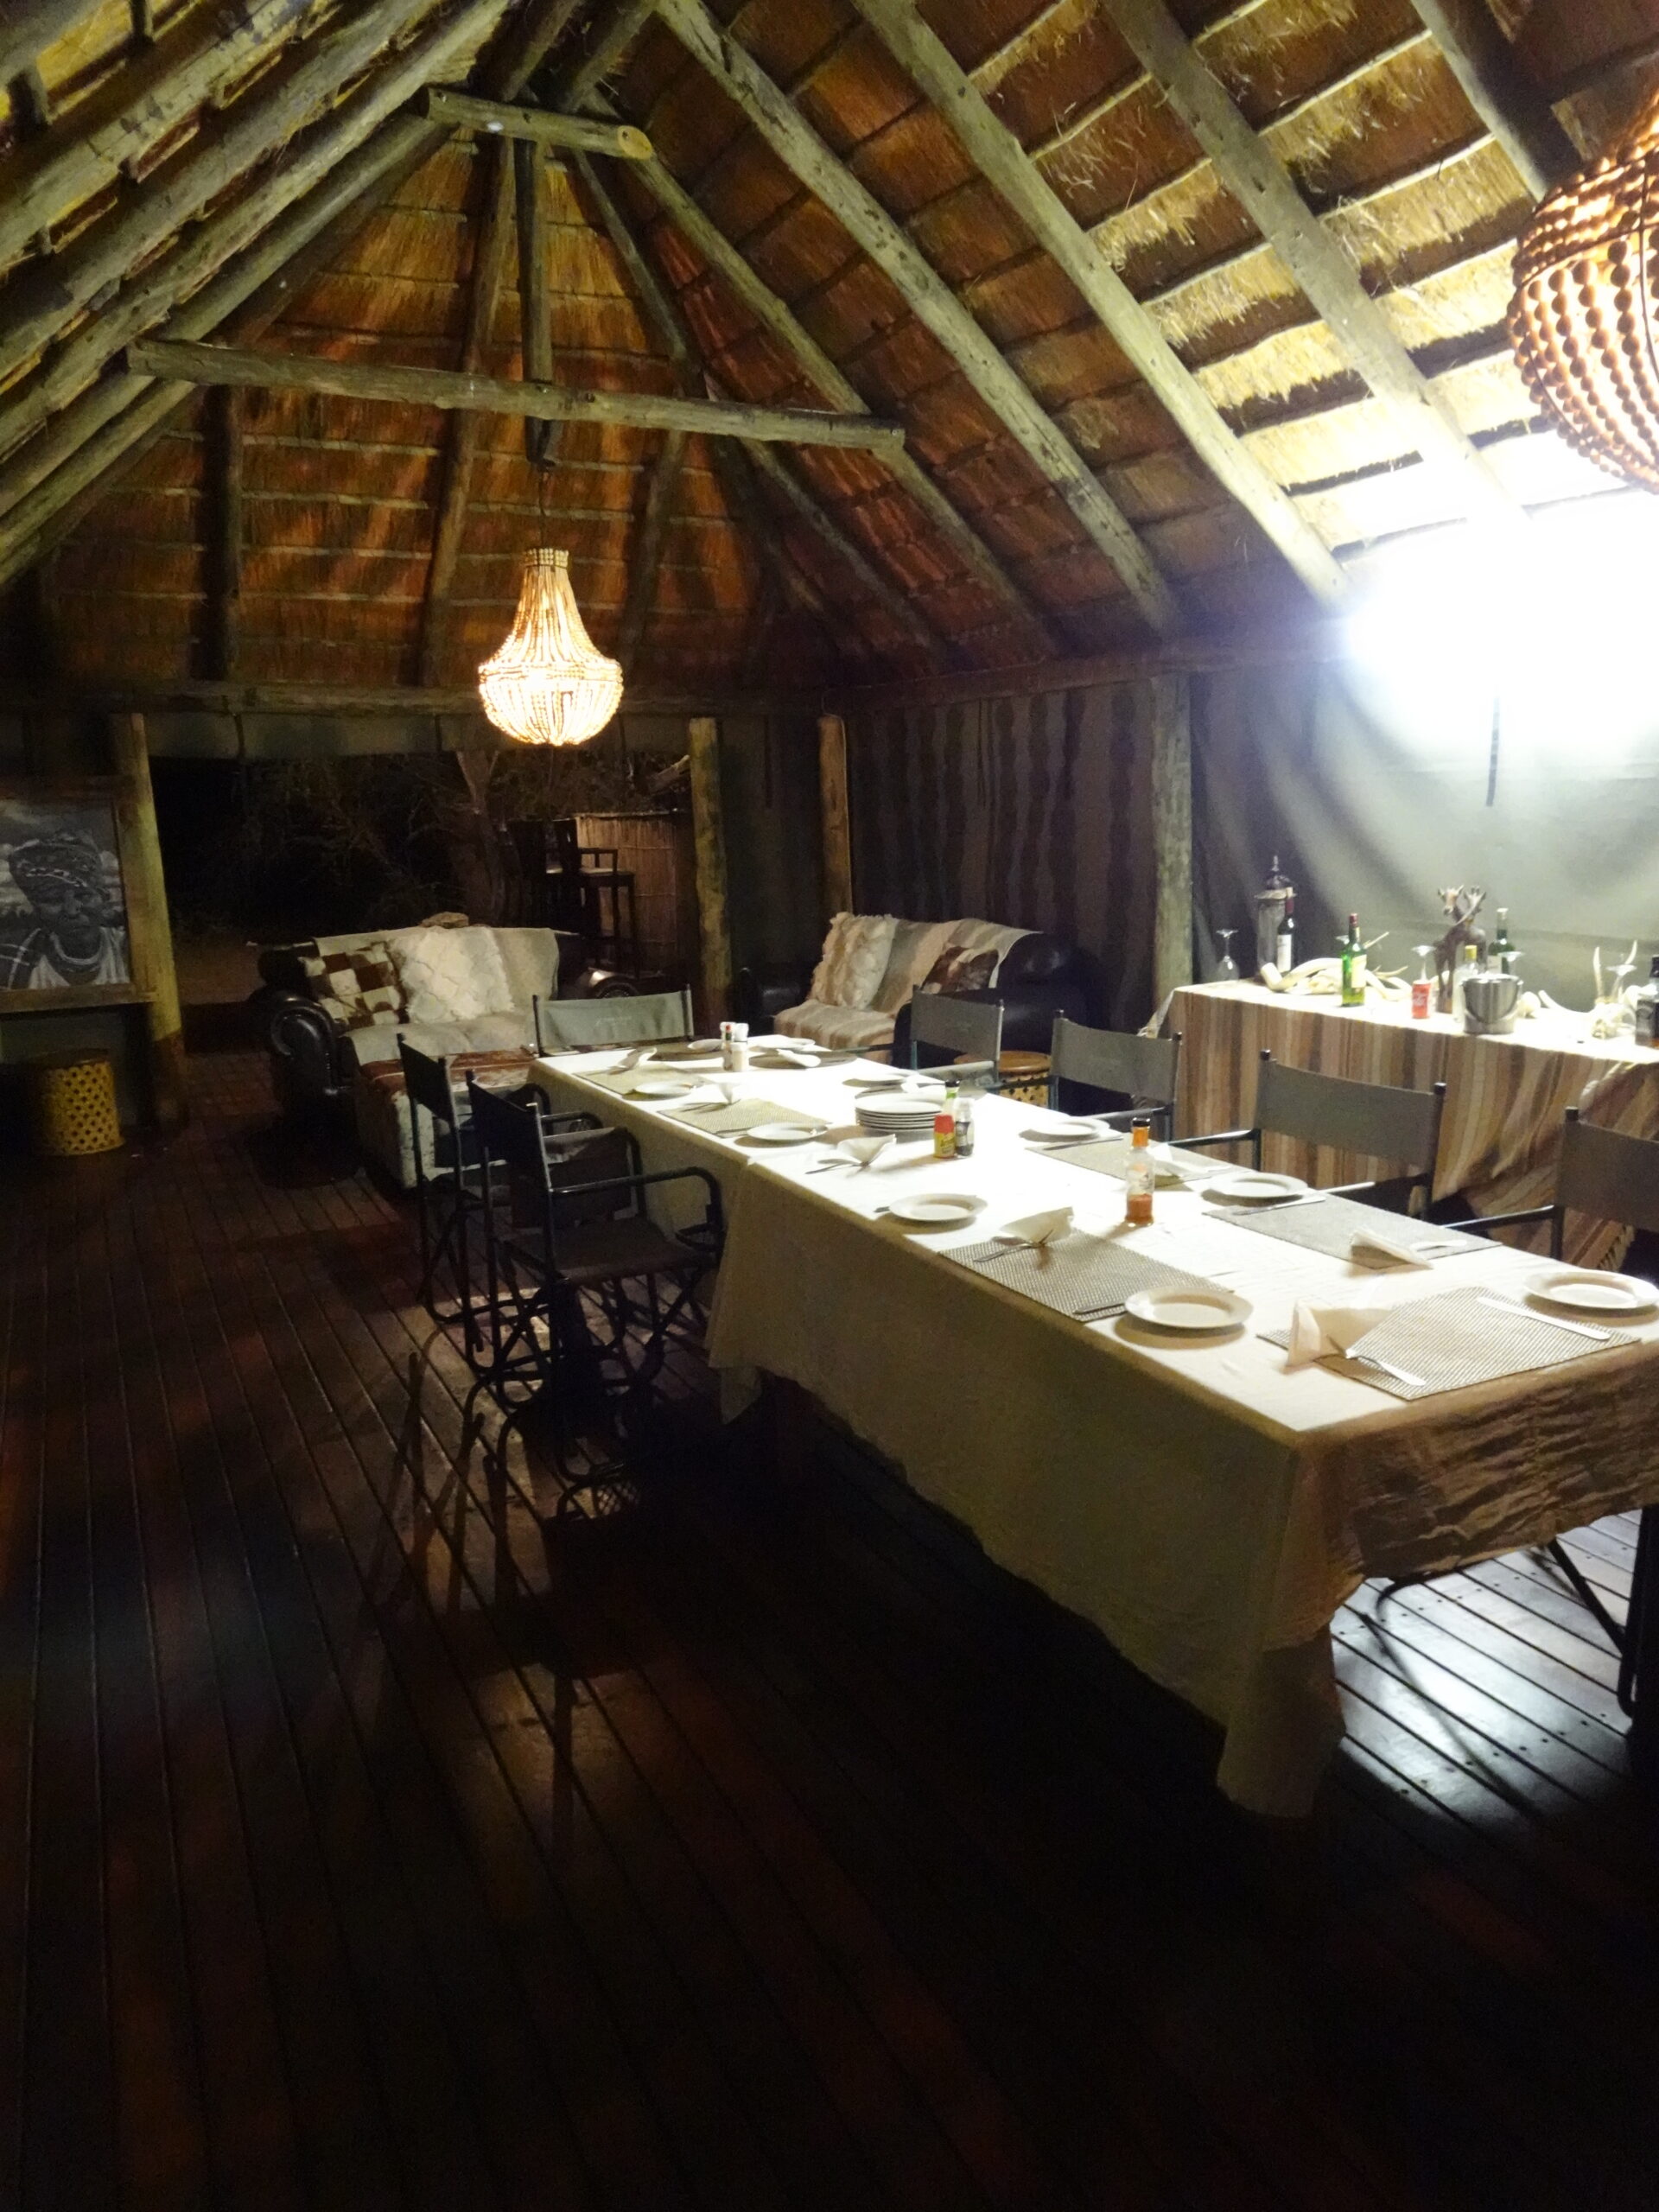 Dining Area of the Lodge